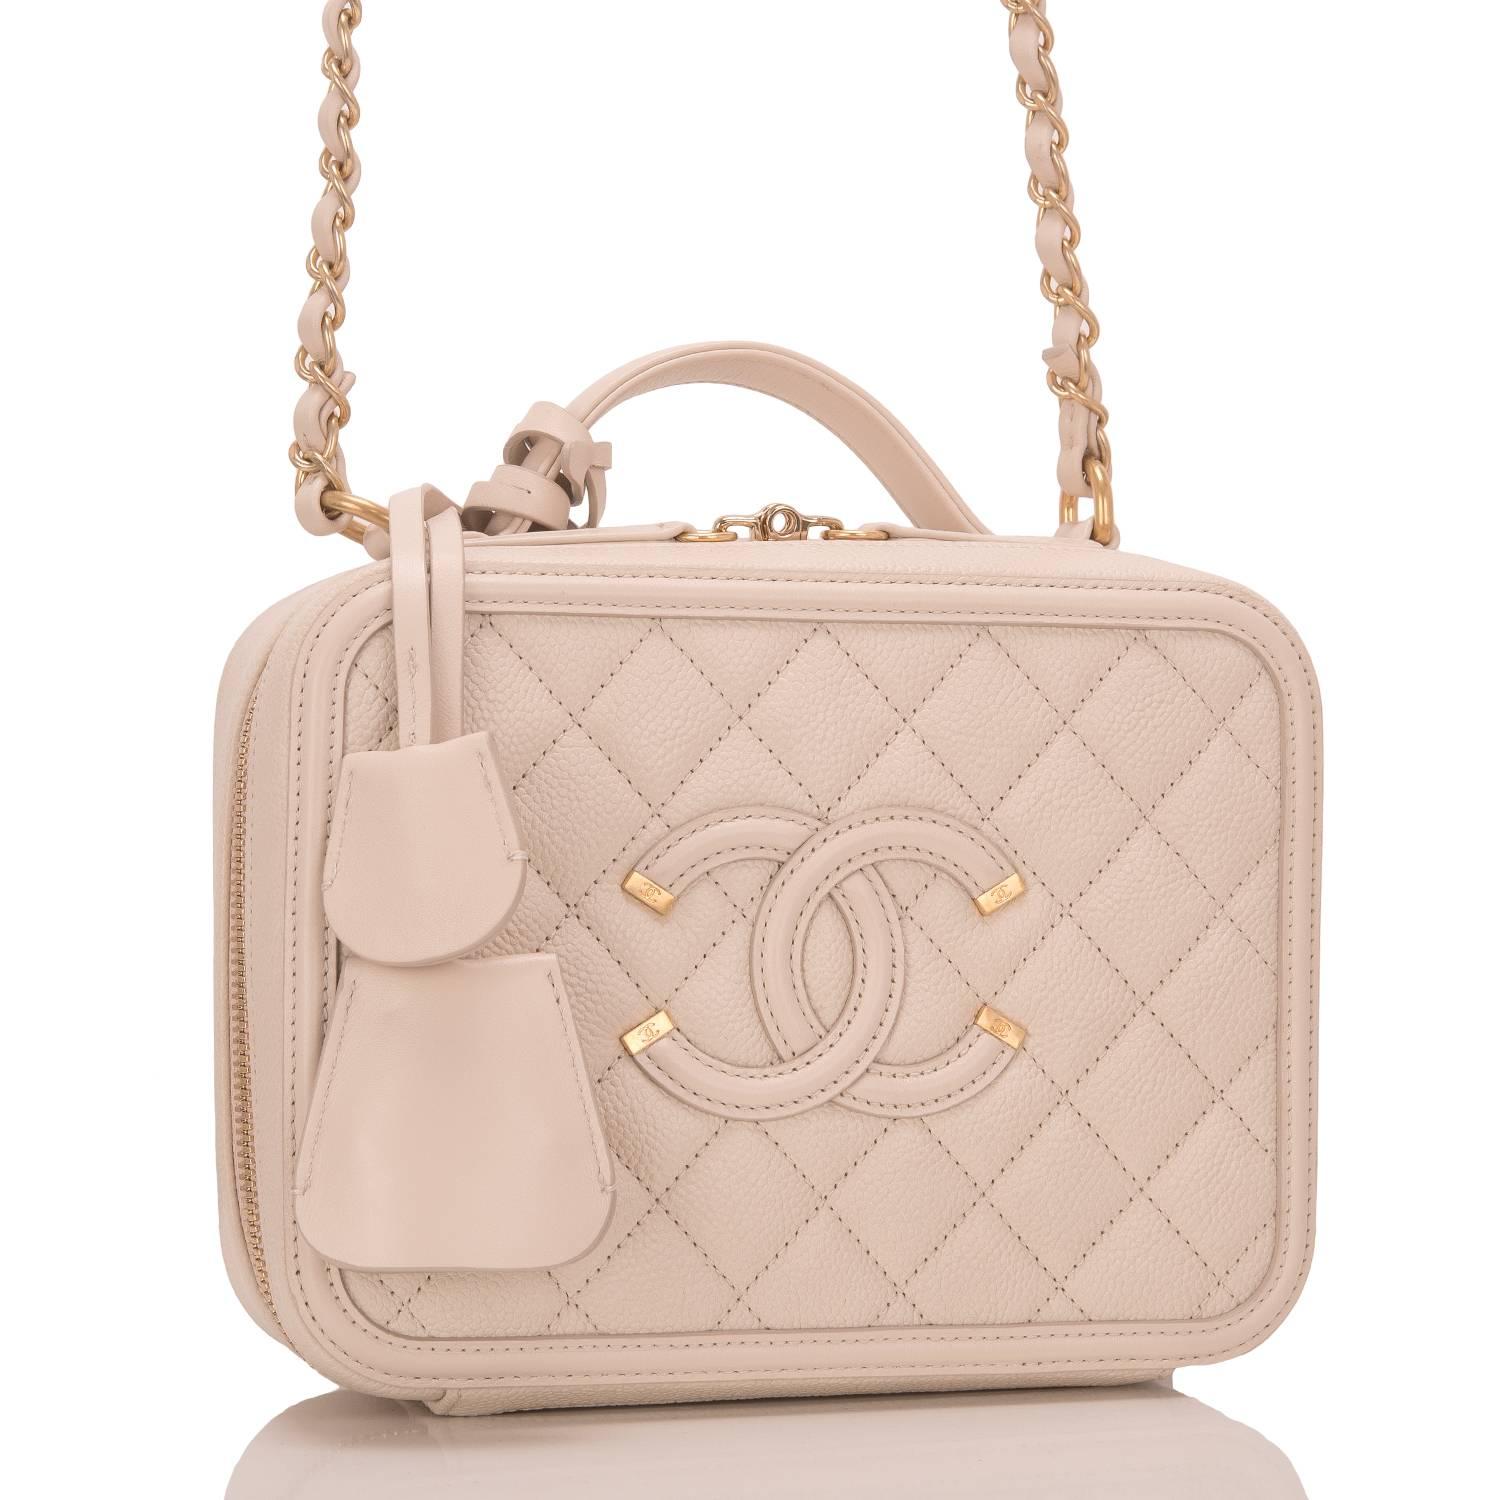 Chanel Small Filigree Vanity Case of light beige caviar leather with gold tone hardware.

This bag features Chanel's signature CC logo stitch in on the front, a gold tone CC lock with a clochette, a matching key with another clochette, zip around